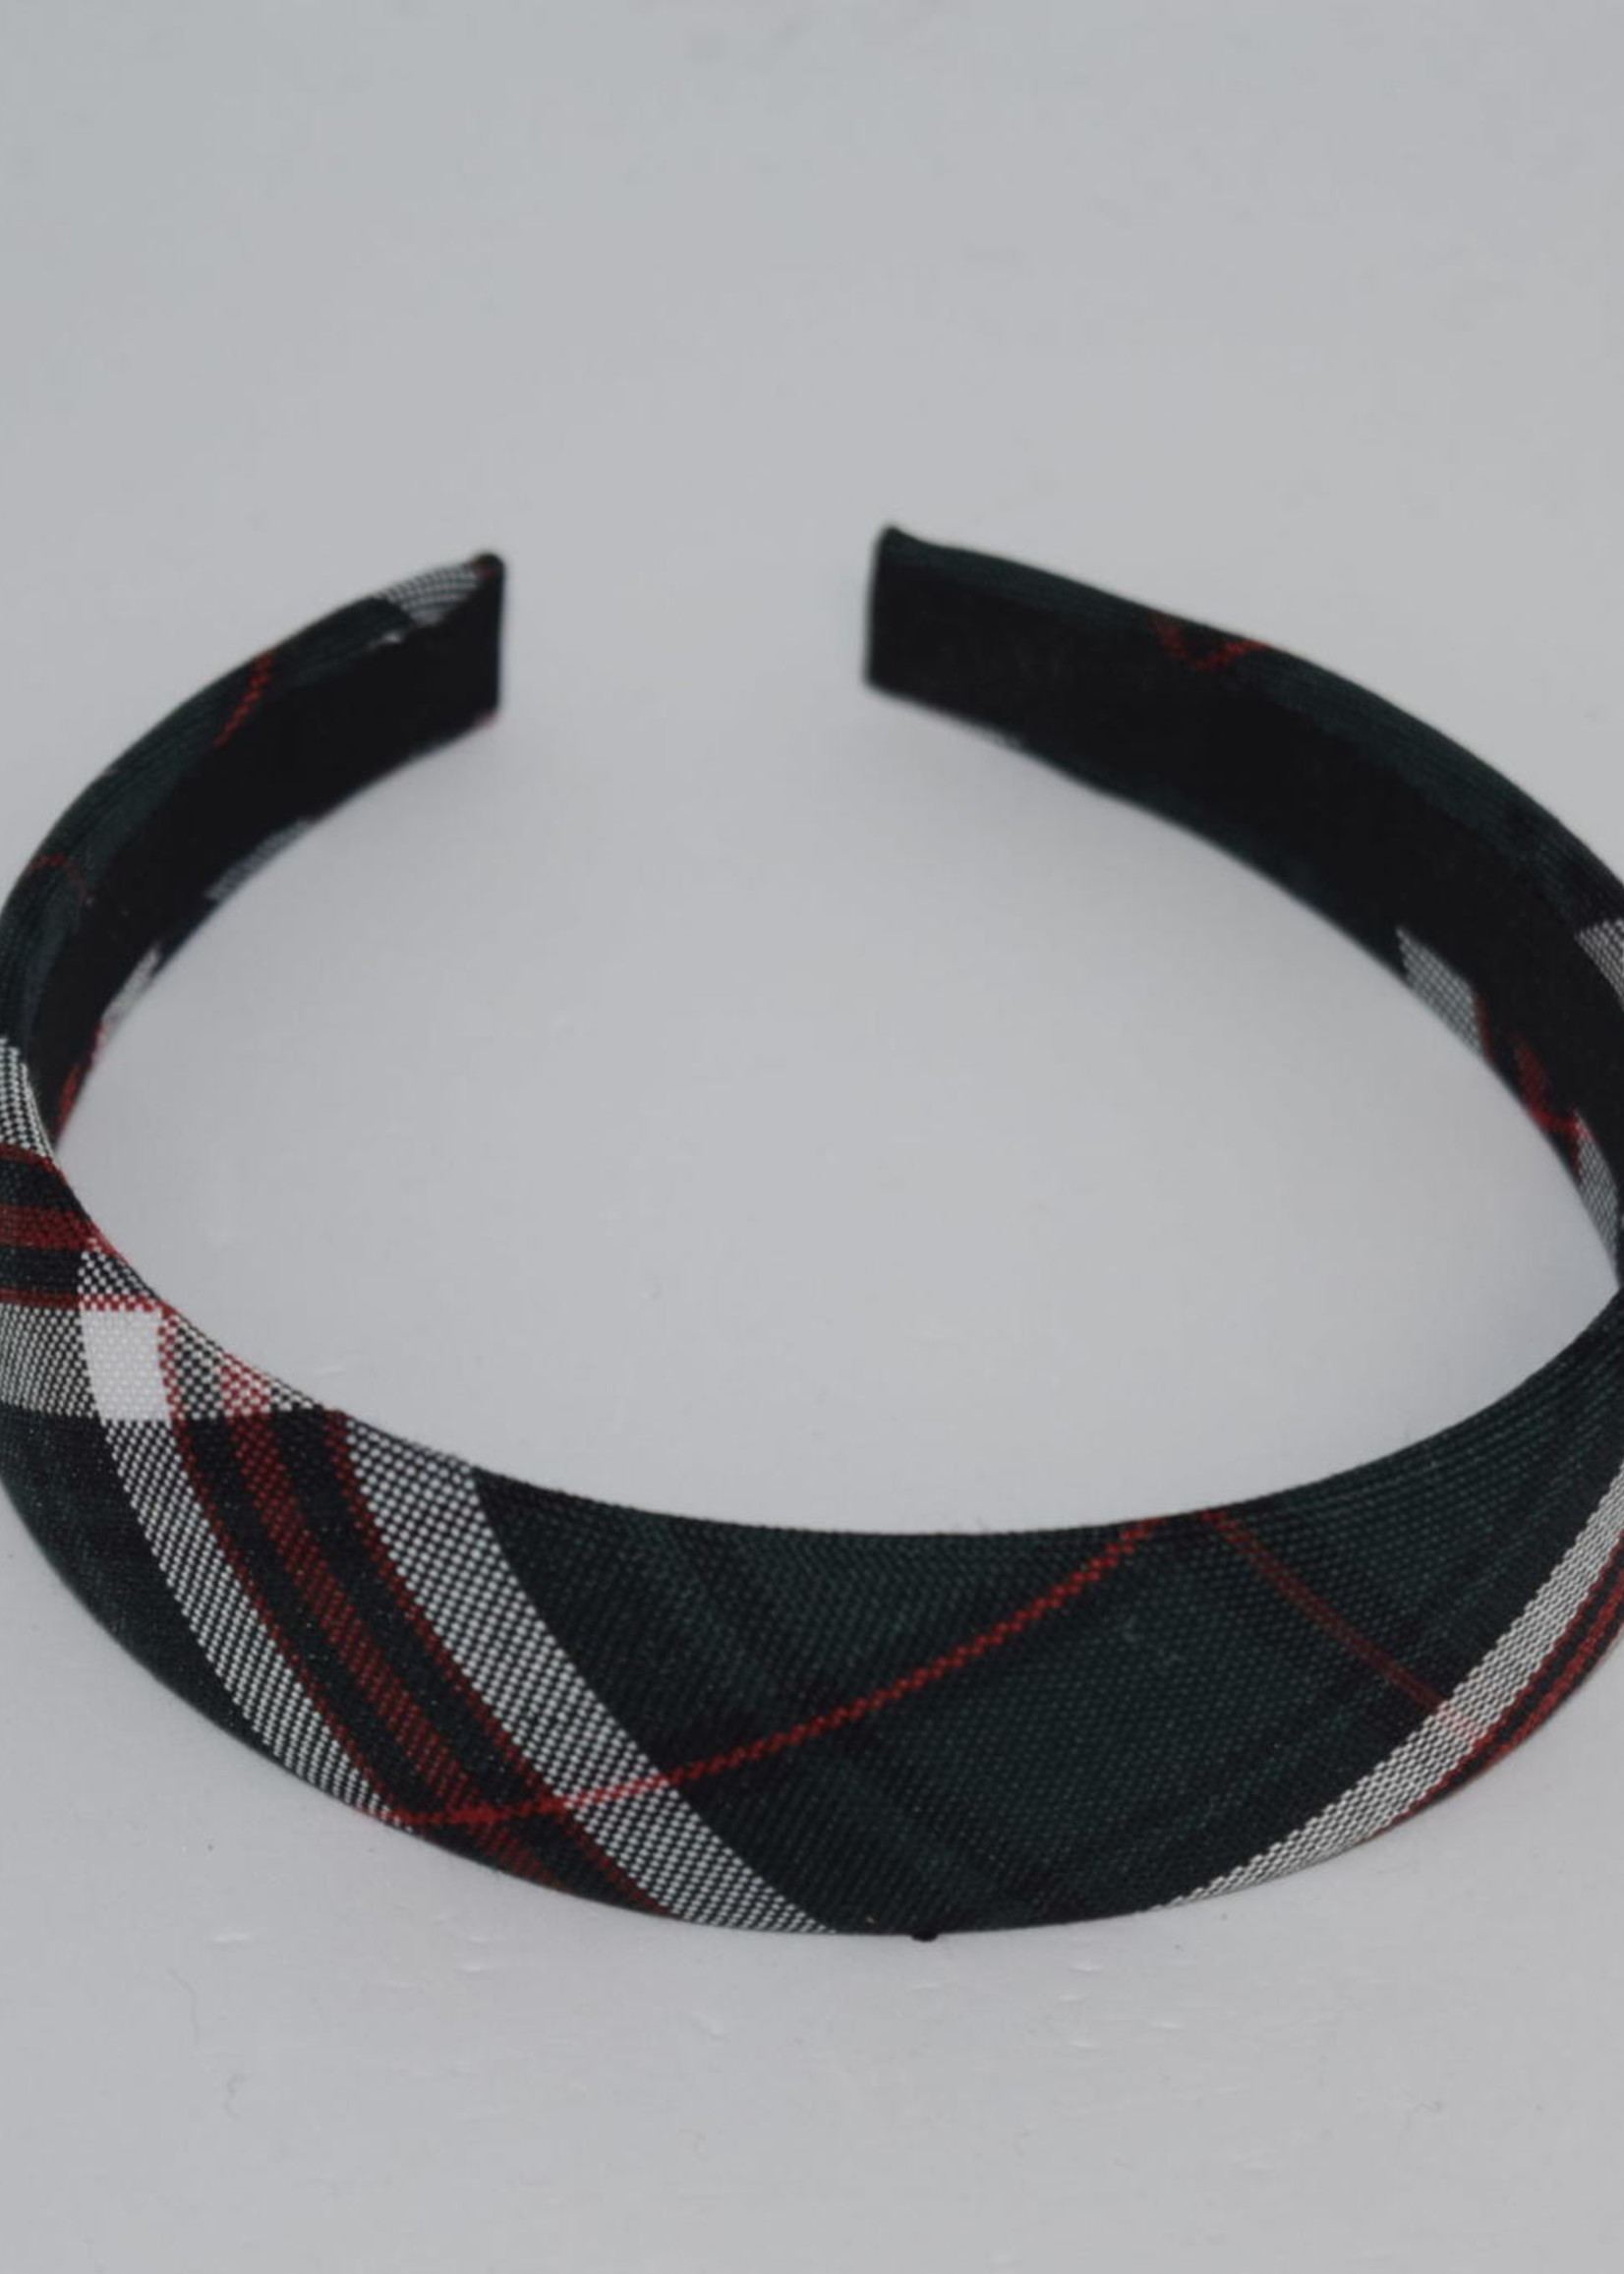 Wide padded headband w/out metal tips P3B